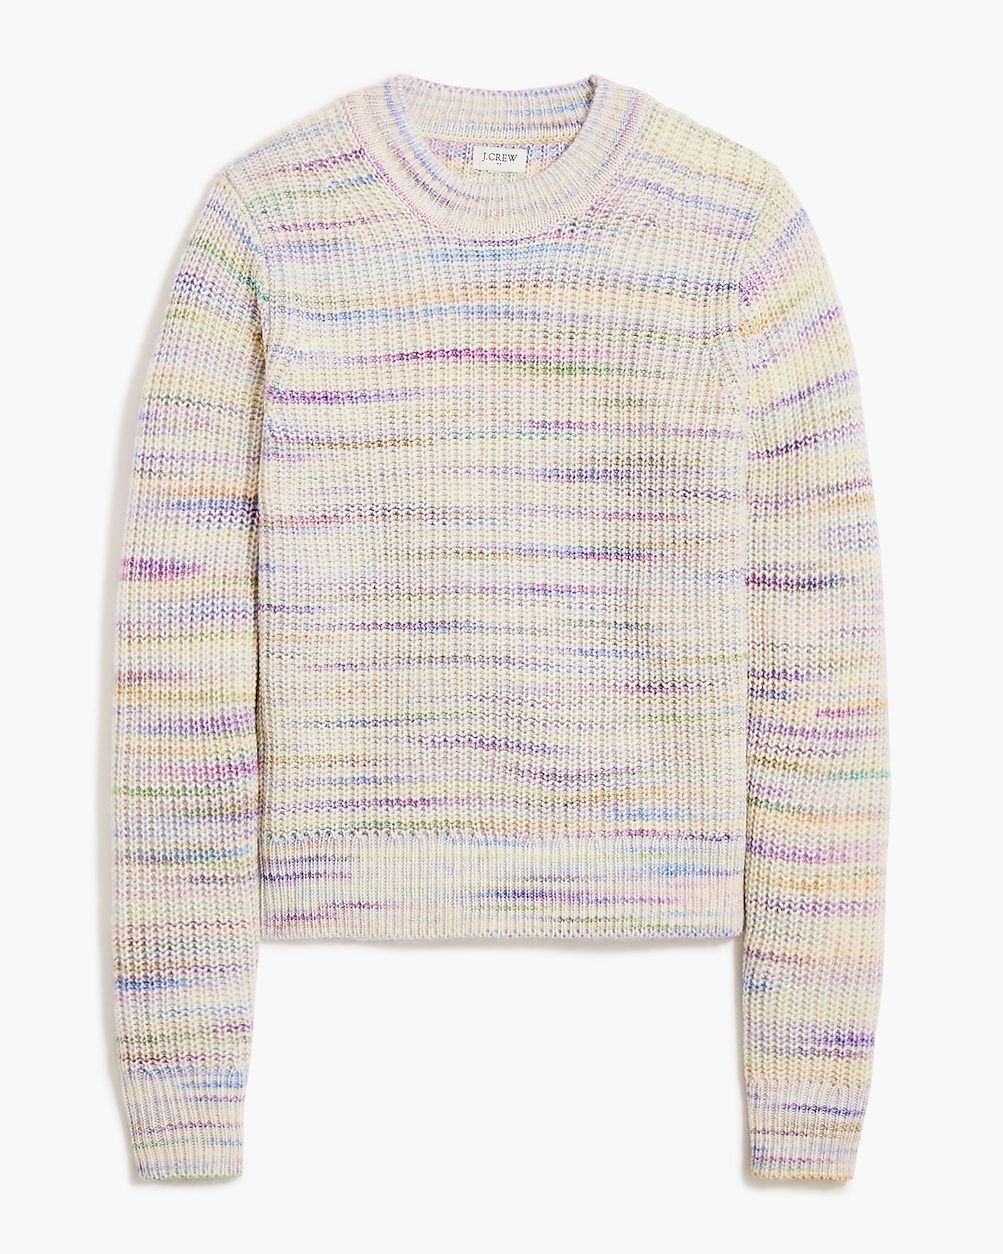 Space-dyed crewneck sweater | J.Crew Factory